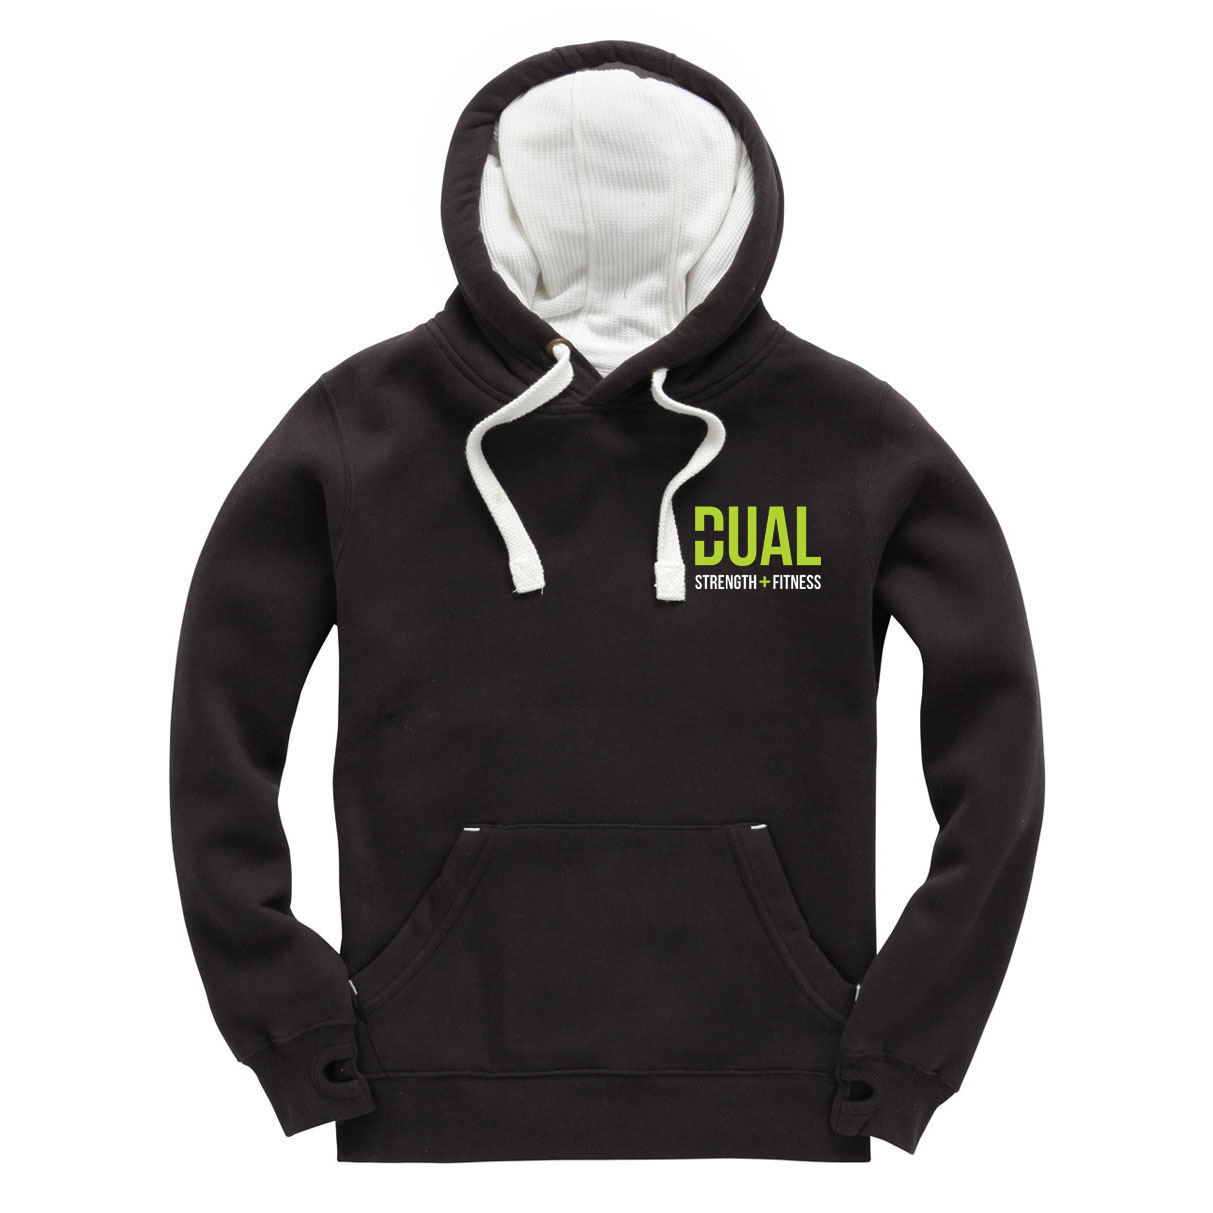 Dual Strength And Fitness - Luxury Pullover Hoodie